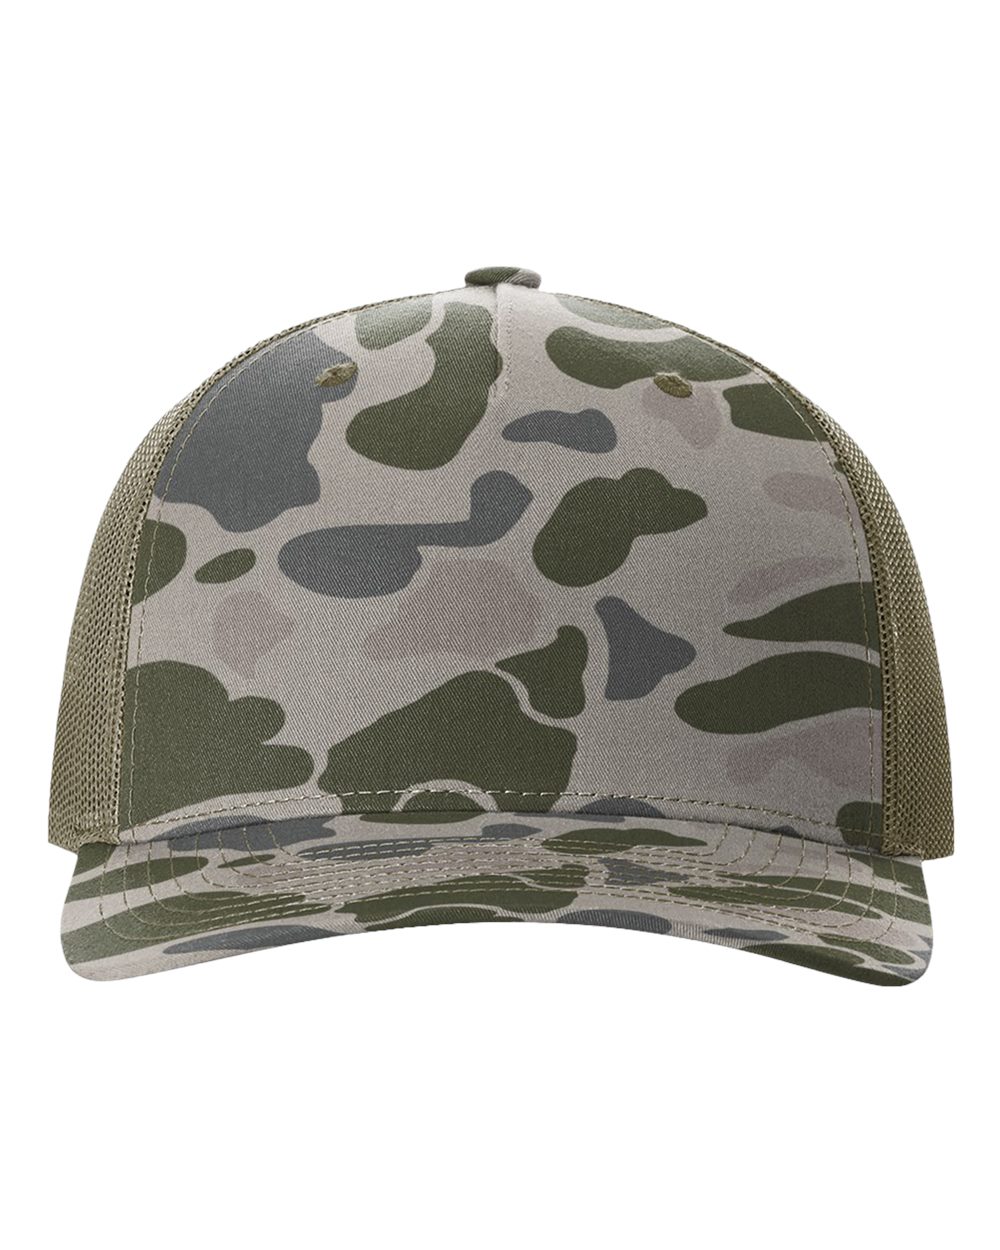 click to view Marsh Duck Camo/ Loden